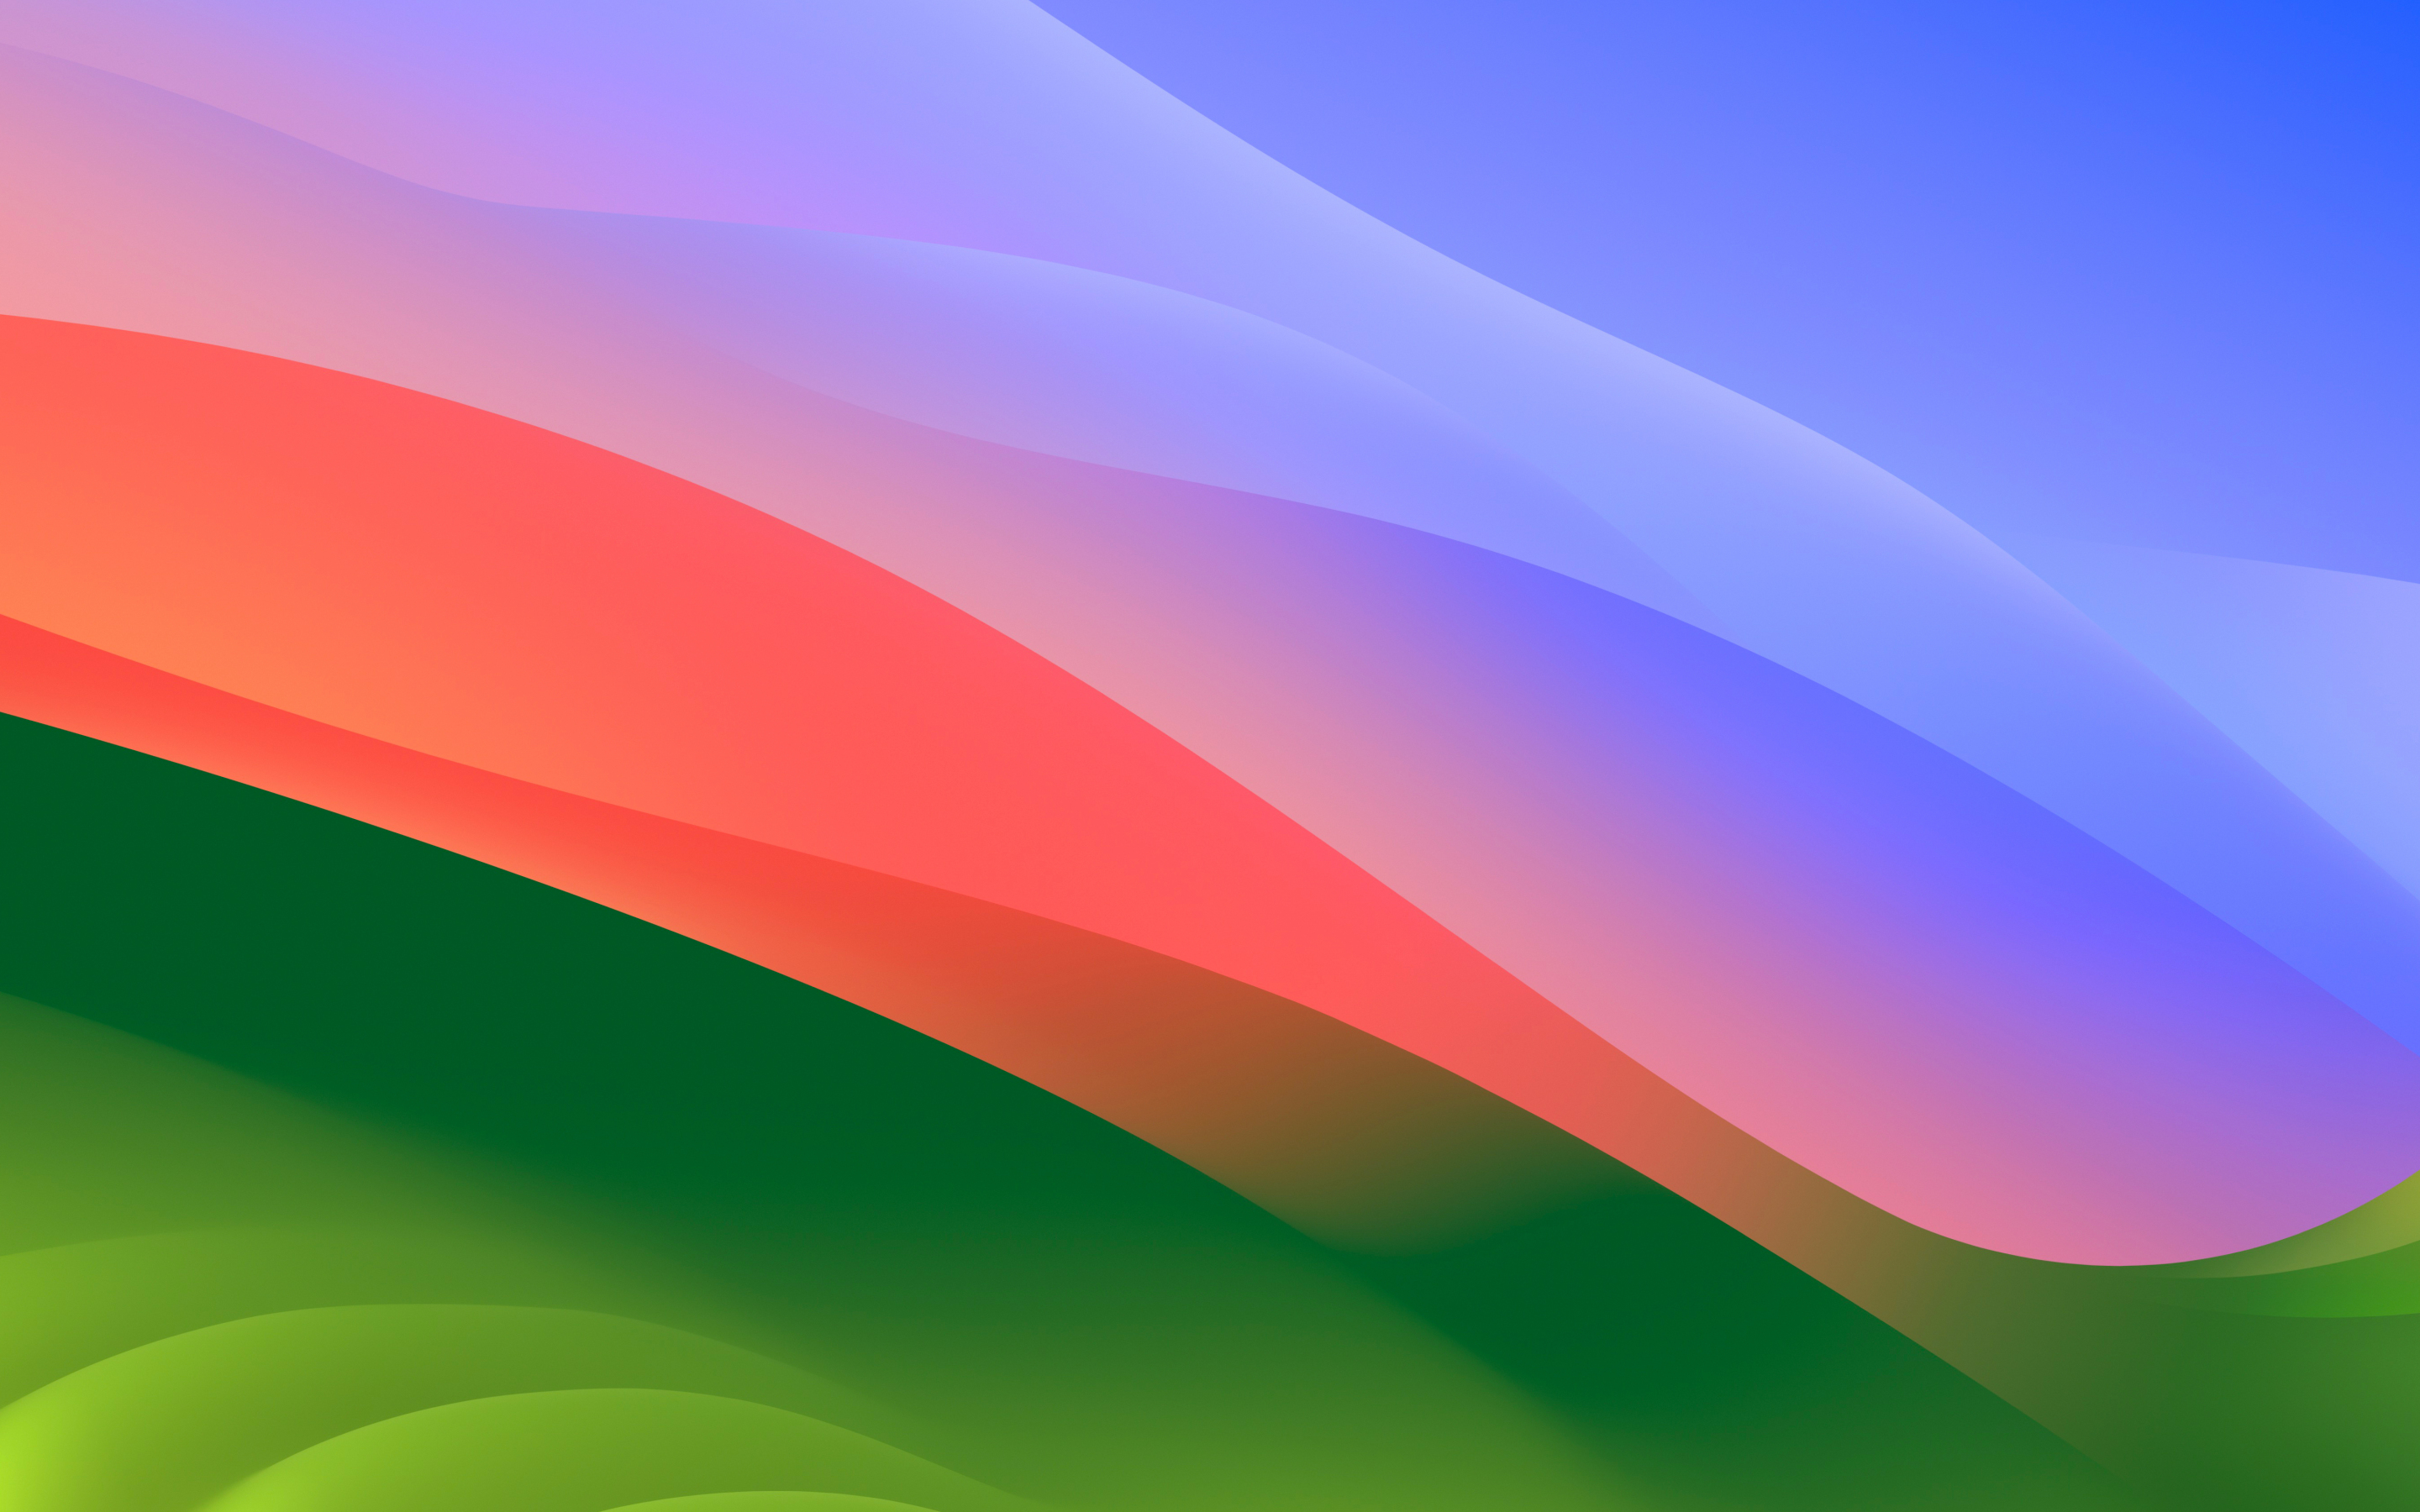 MacOS Sonoma, colorful waves, stock photo, 2880x1800 wallpaper